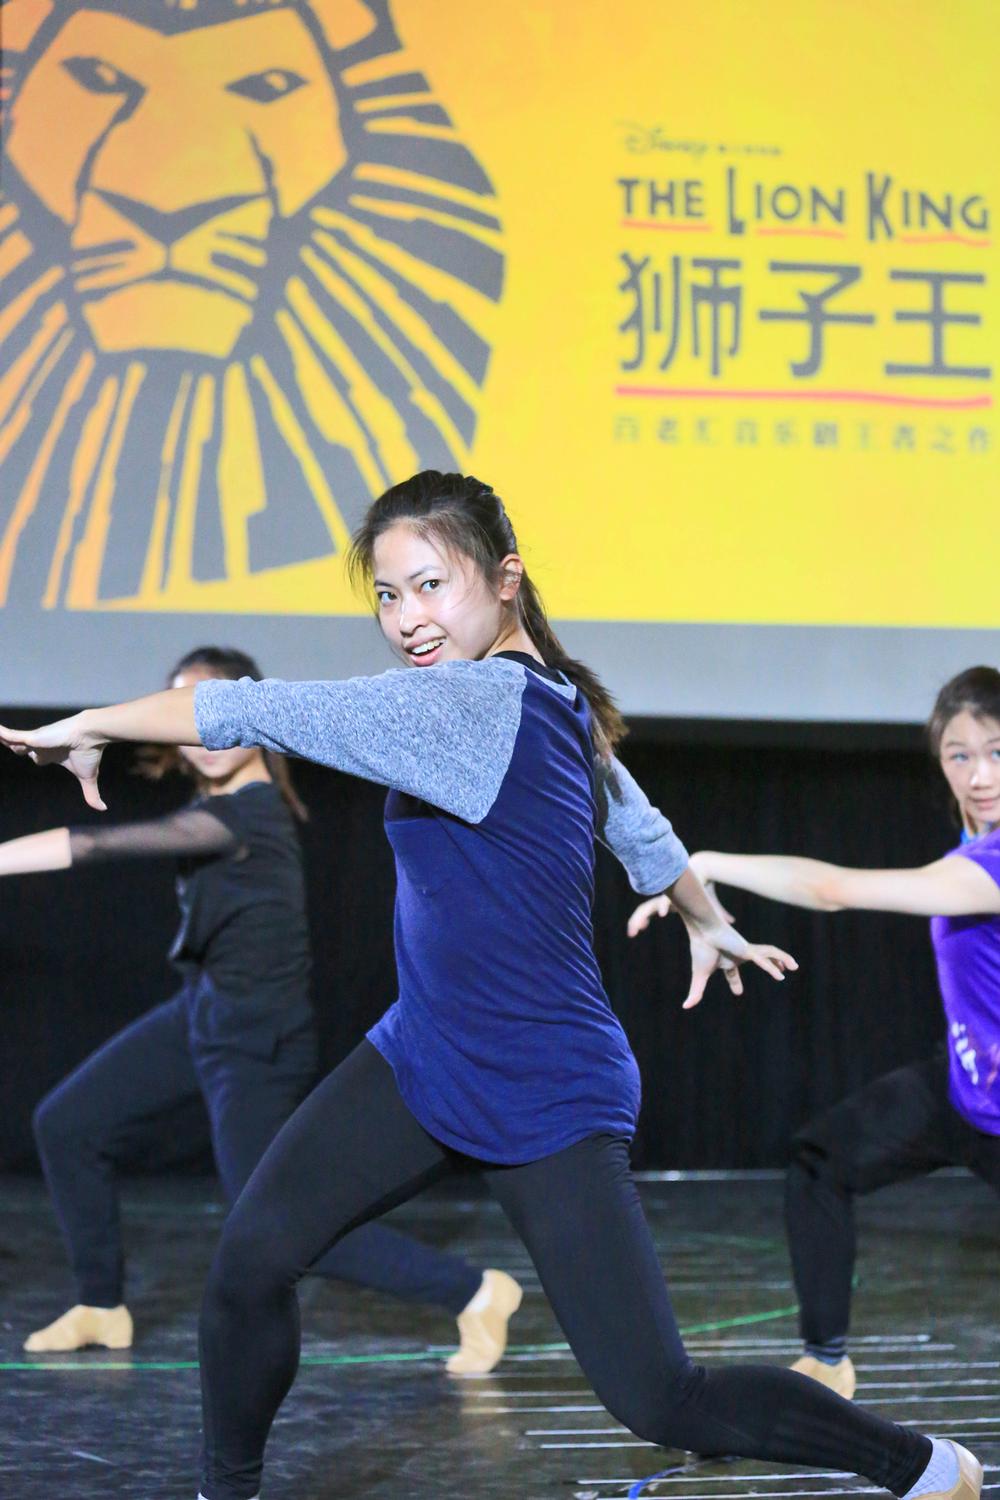 Cast are pictured rehearsing the musical The Lion King, which is being performed in Mandarin